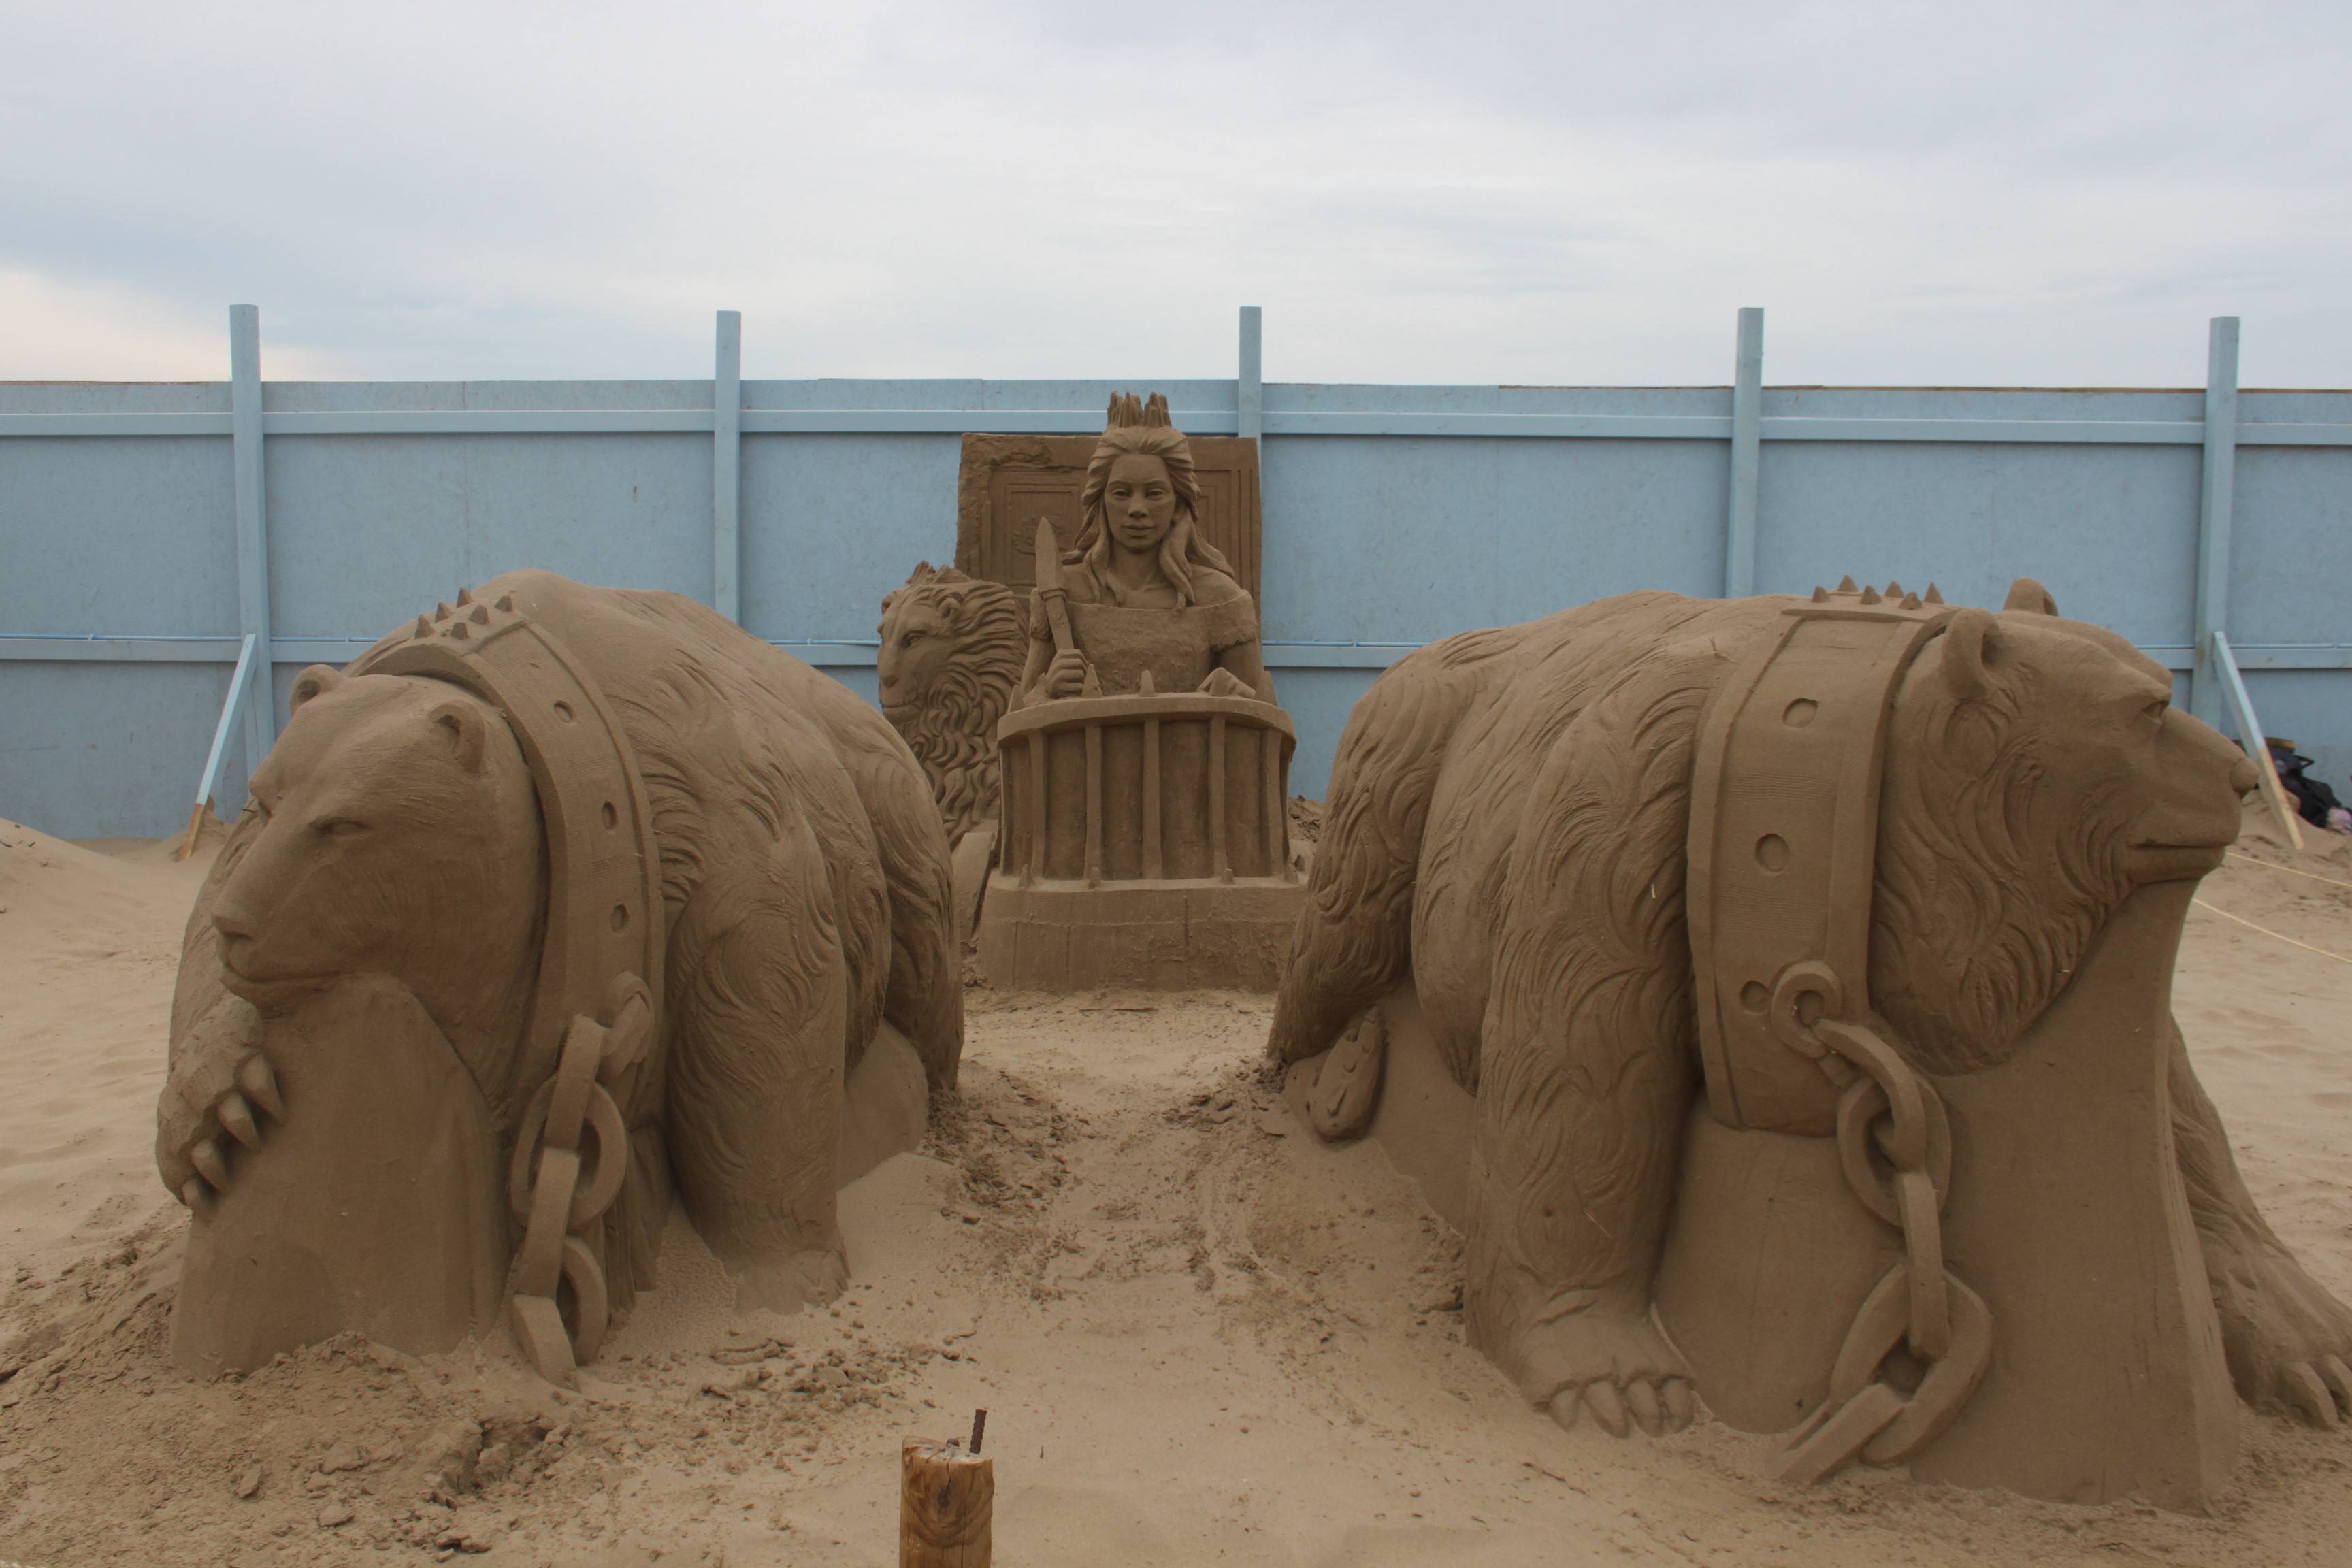 Sand_Sculpture_at_Weston_super_Mare_of_The_Lion_The_Witch_and_the_Wardrobe_by_Montse_Cuesta_2.jpg